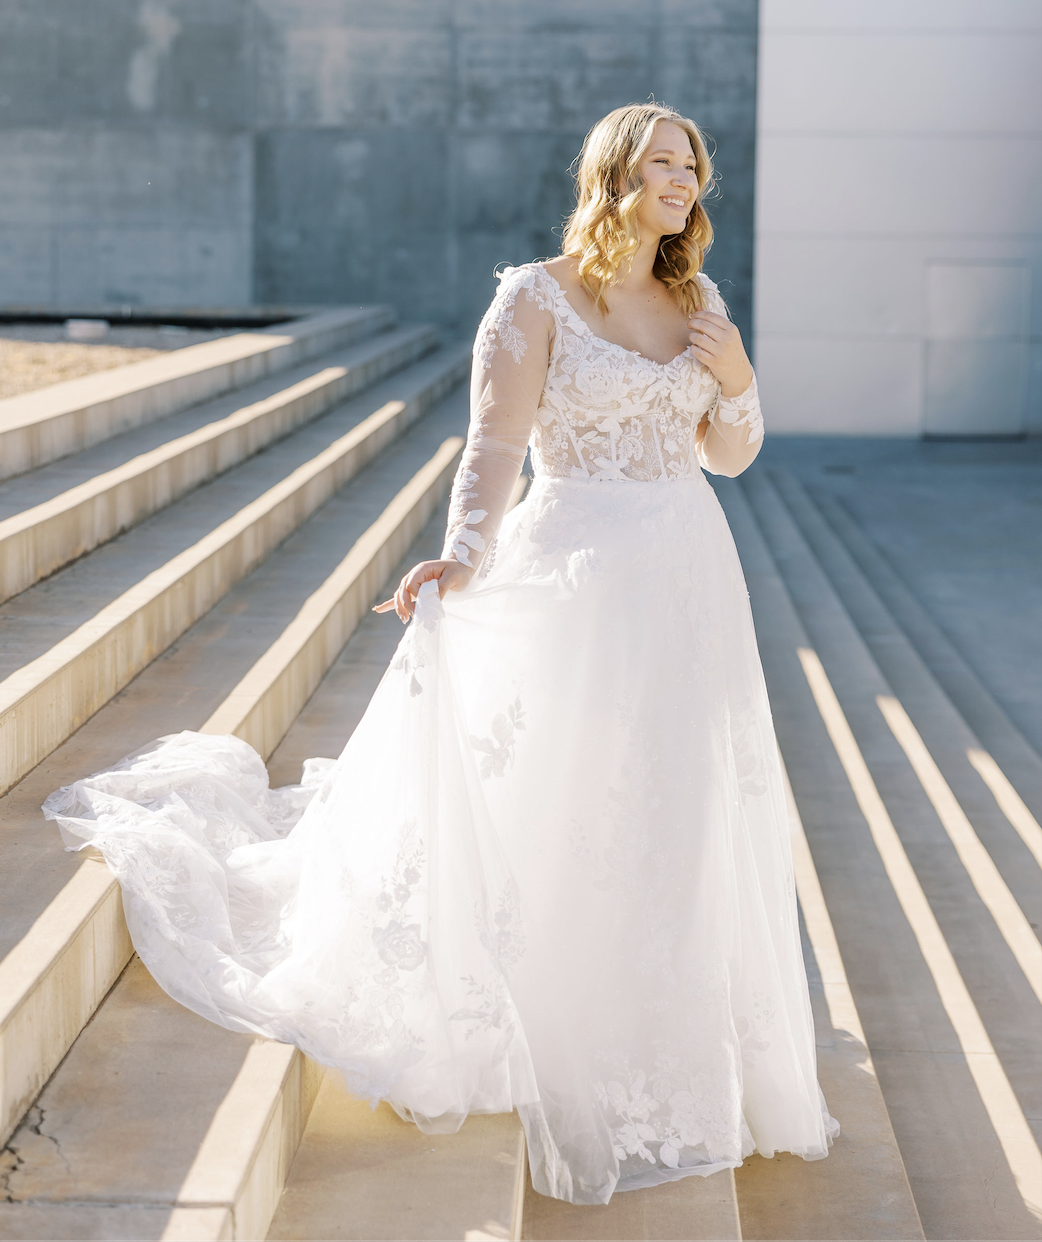 Madly in Love Romantic Wedding Dresses Image